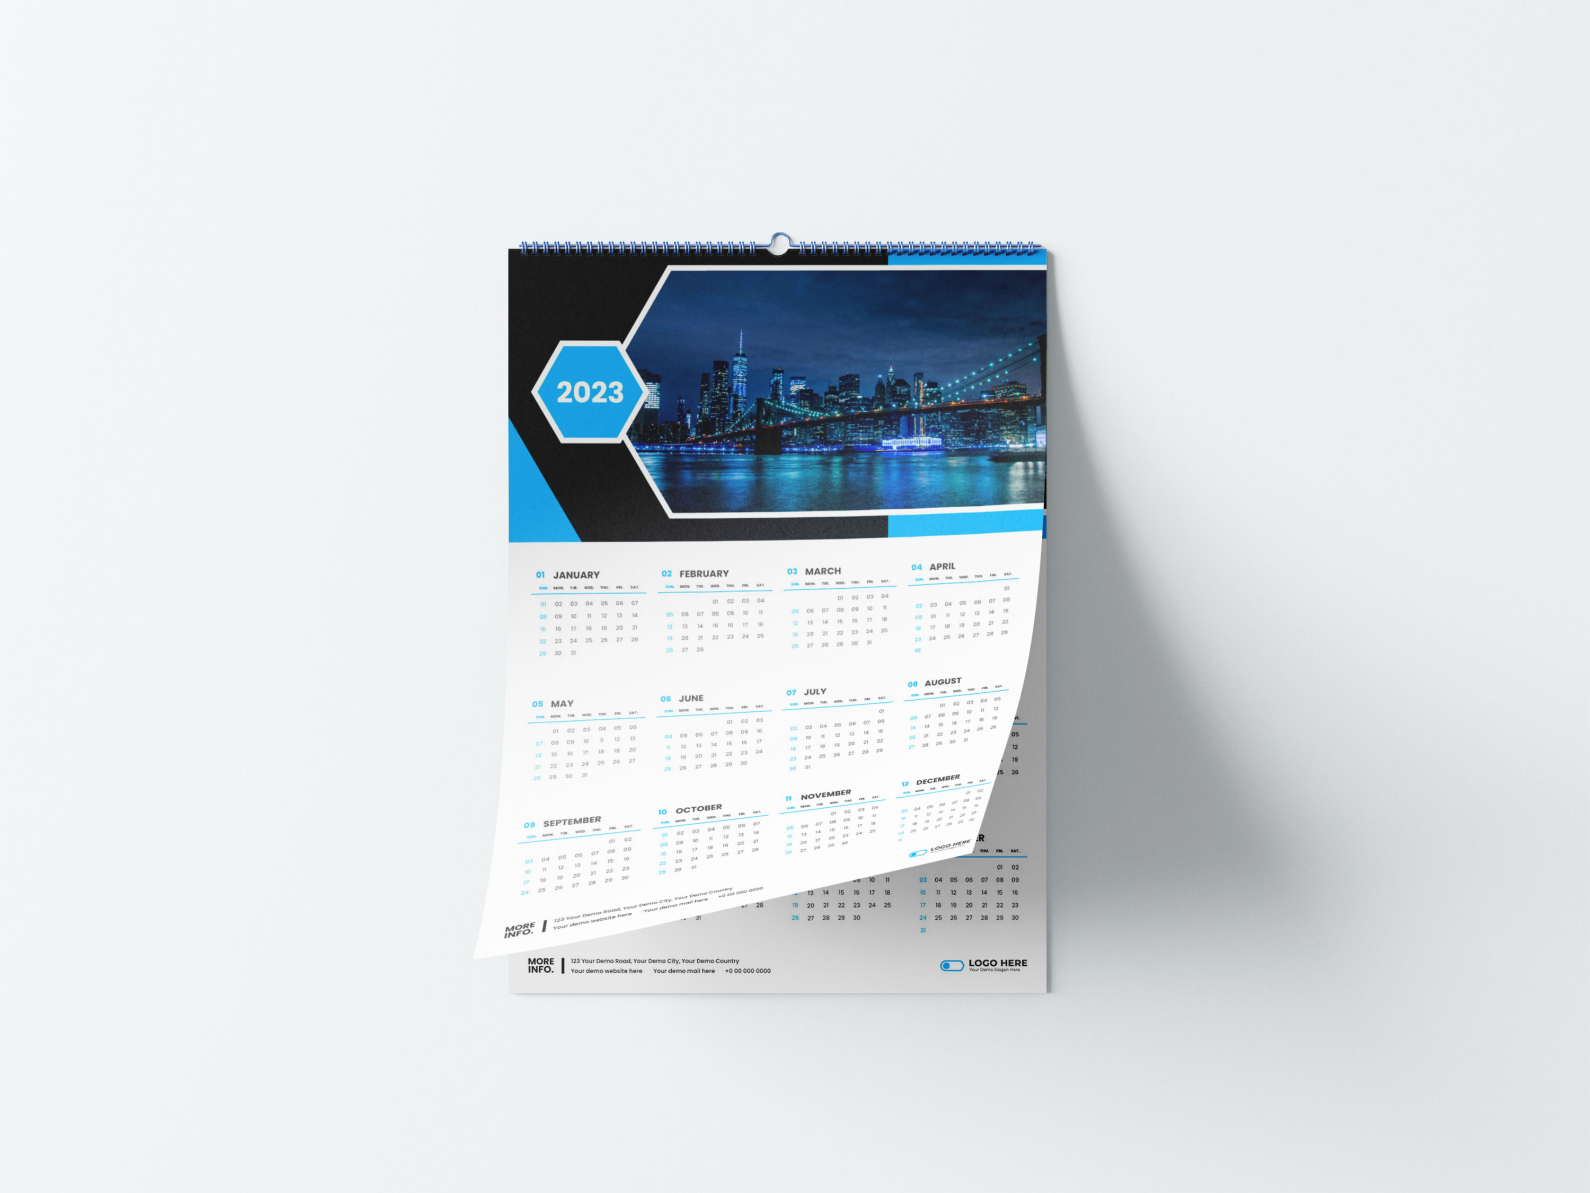 2023 calendar design template by Tanmoy Topu on Dribbble